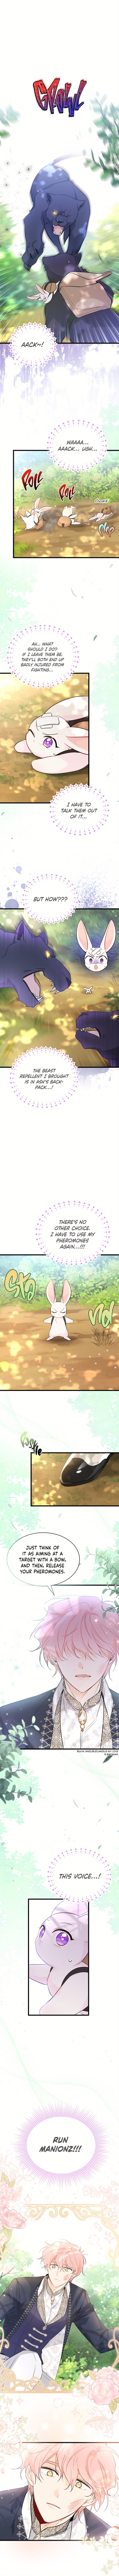 The Symbiotic Relationship Between A Rabbit and A Black Panther - Chapter 61 Page 5